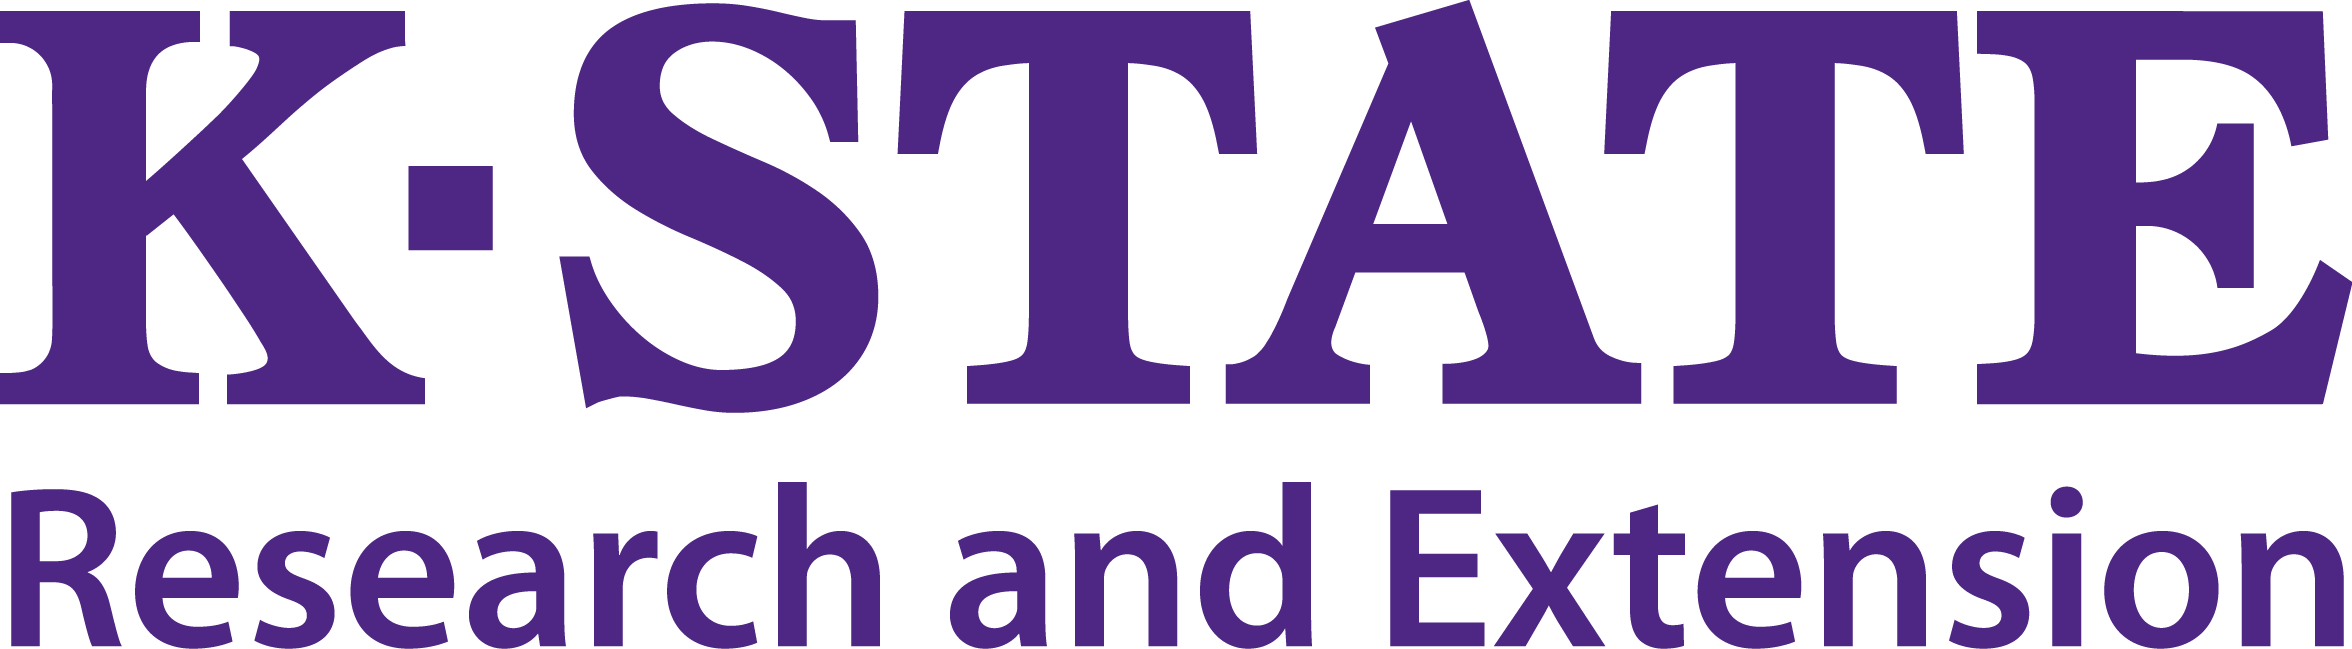 in purple, text on top says K-State and underneath research and extension